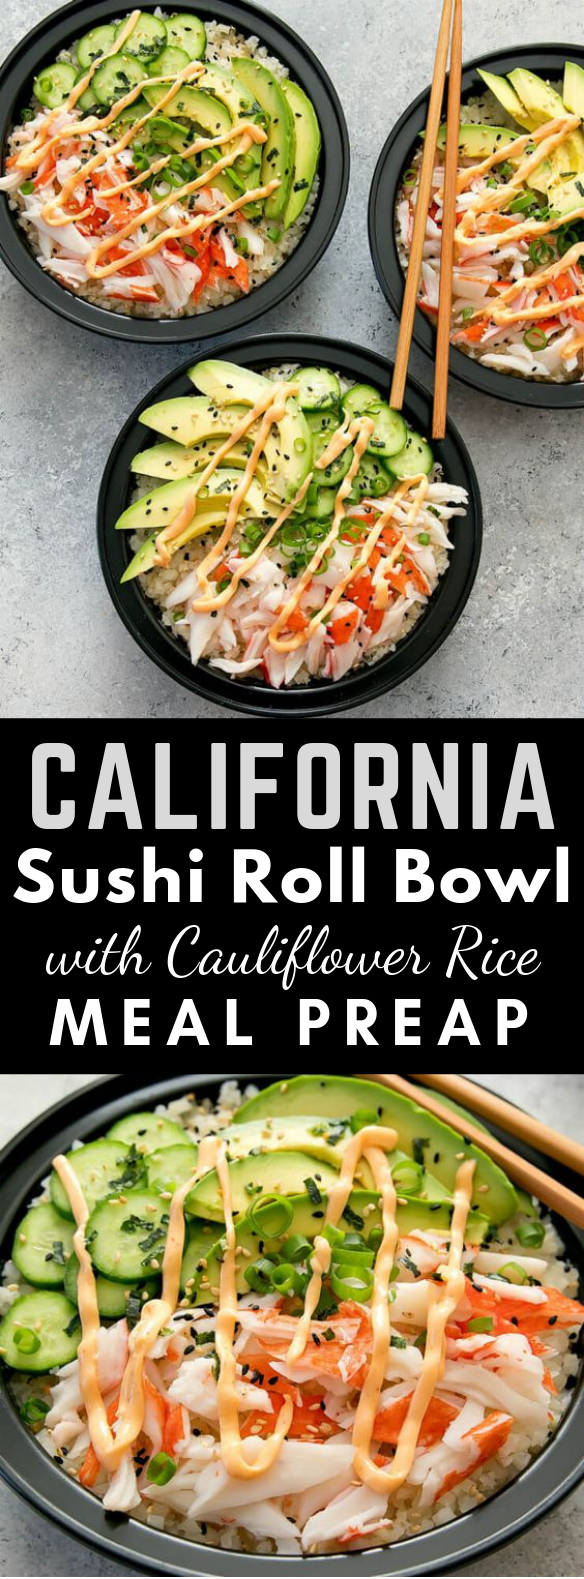 CALIFORNIA SUSHI ROLL BOWLS WITH CAULIFLOWER RICE MEAL PREP #Meals #Sushi